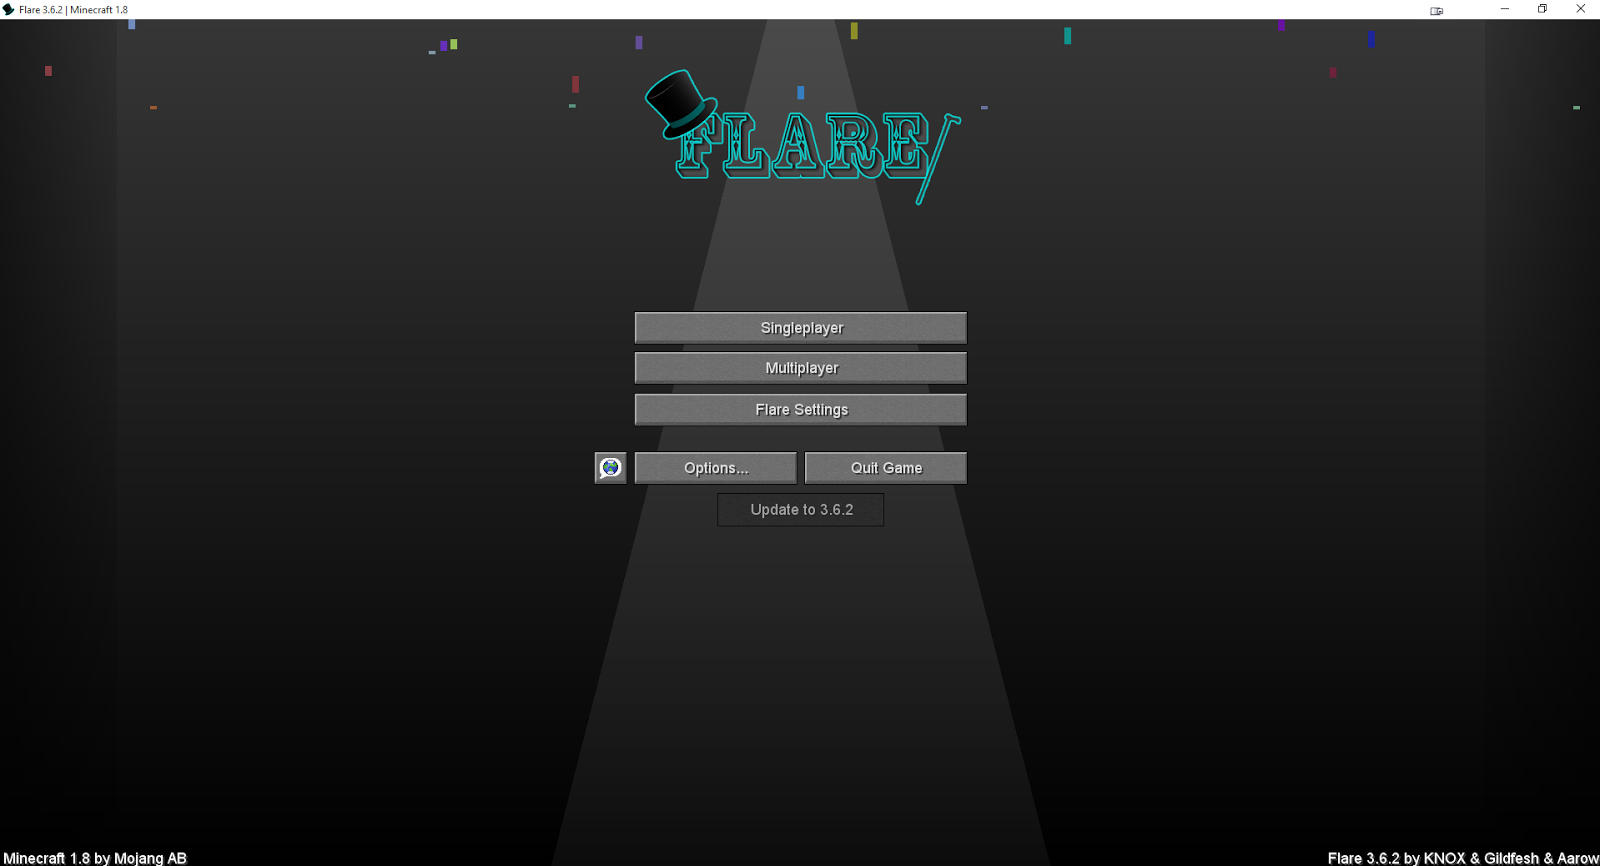 flare hacked client 1.8 download